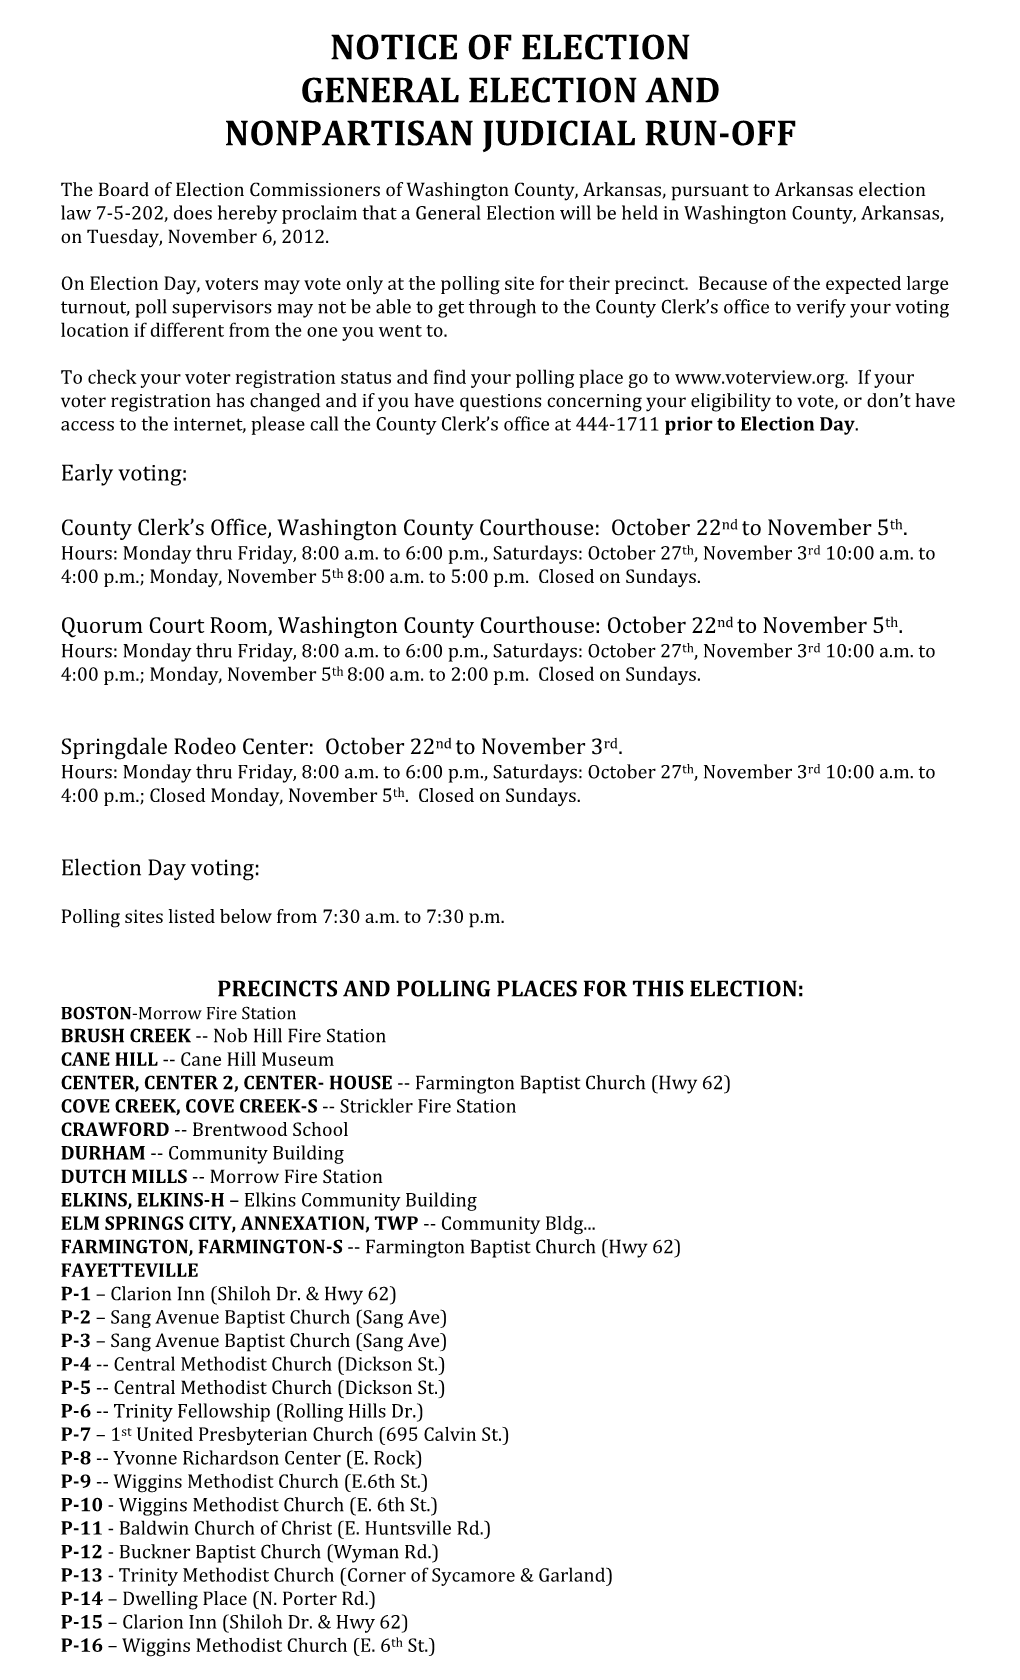 Notice of Election General Election and Nonpartisan Judicial Run-Off